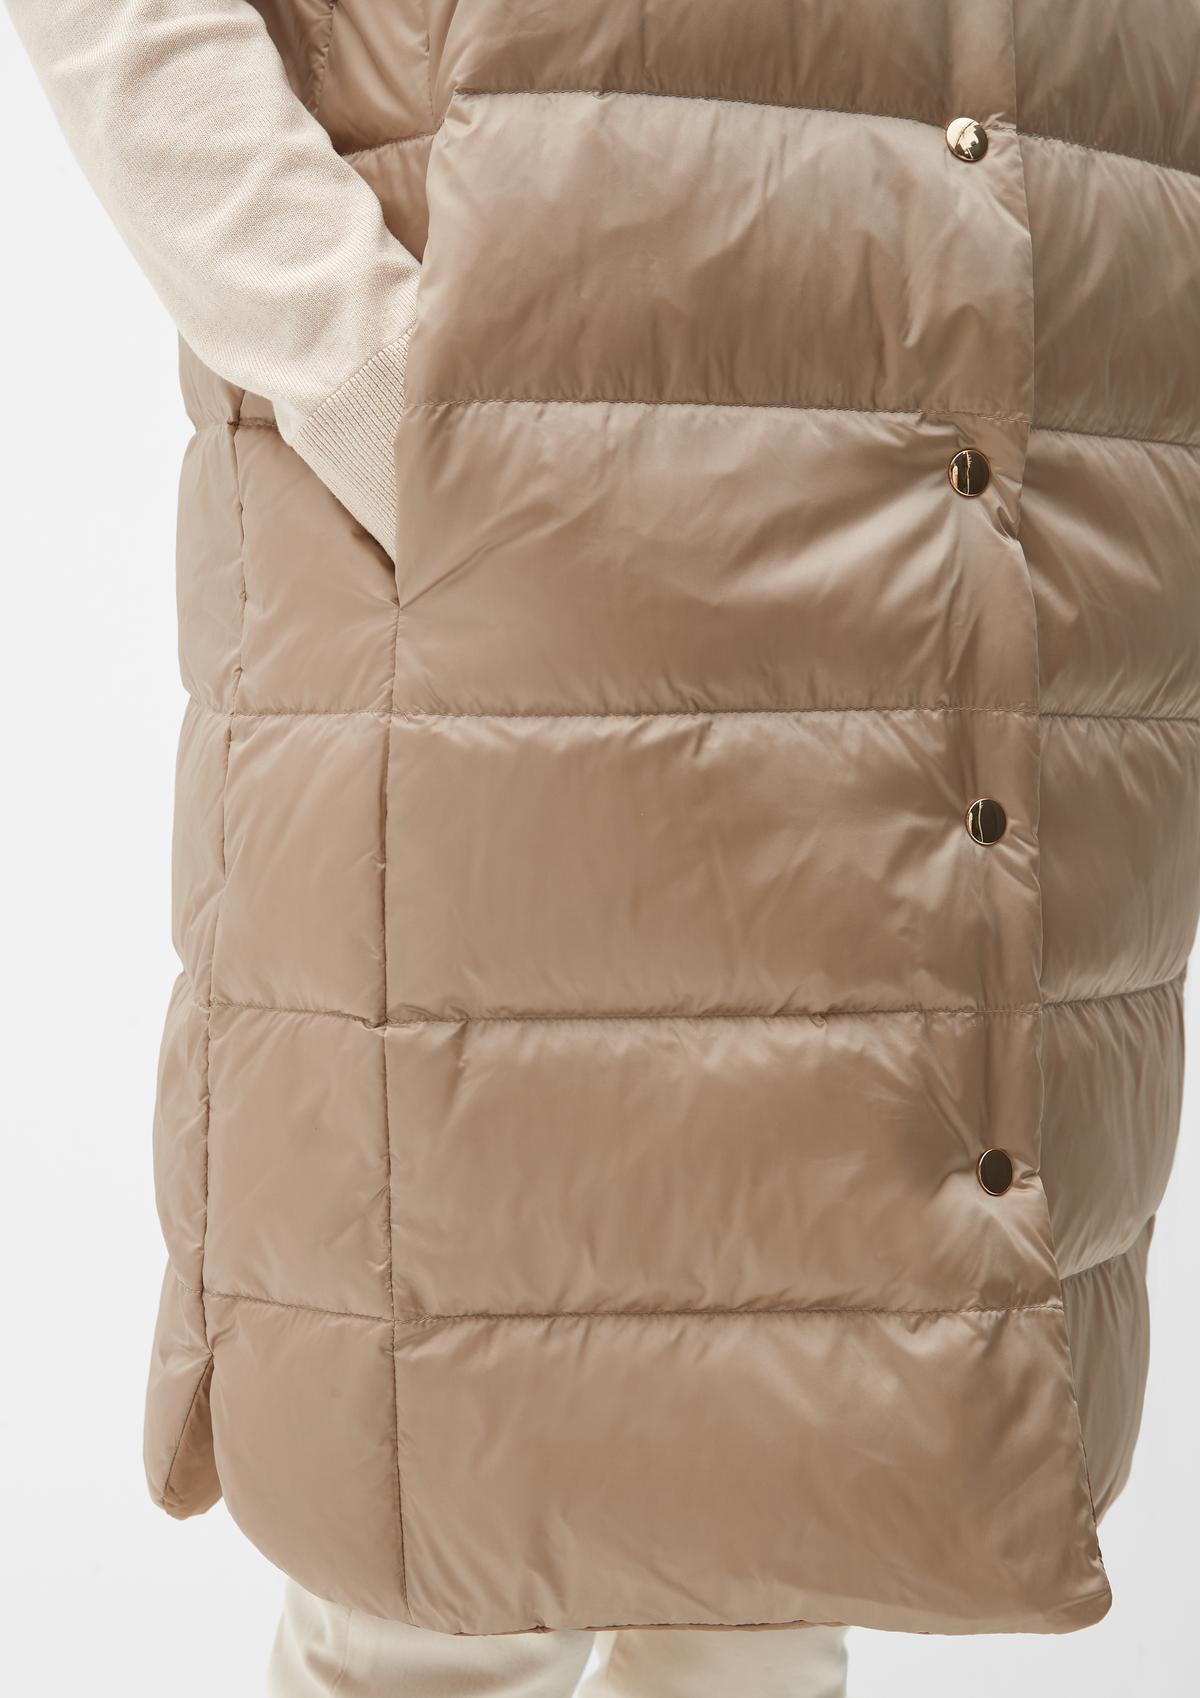 s.Oliver Long body warmer with a hood